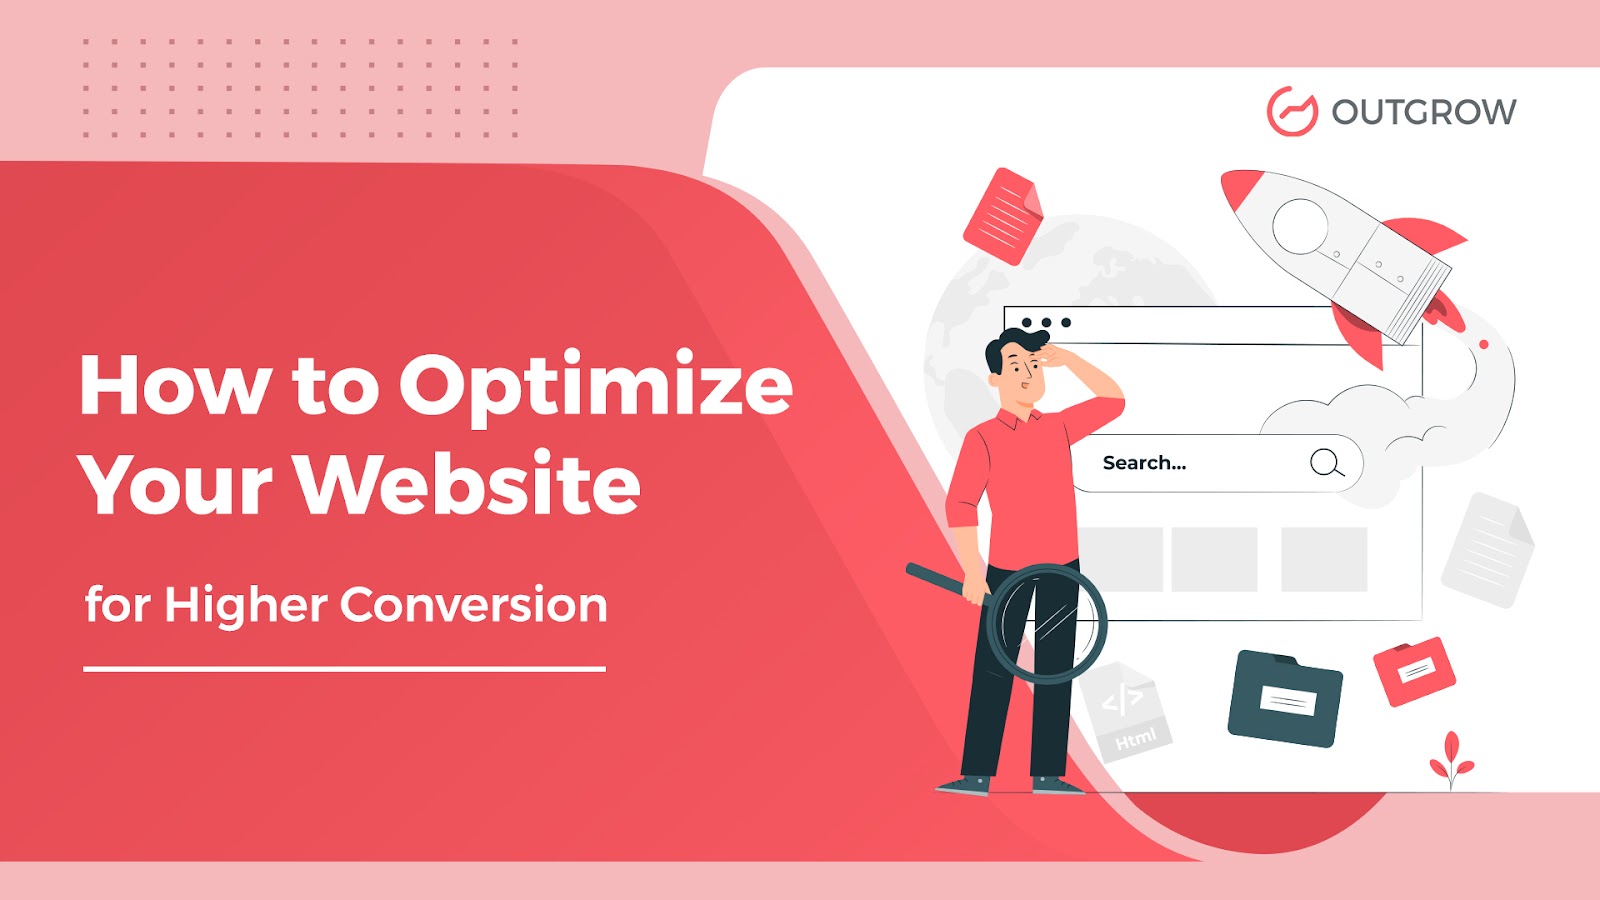 Optimize Your Website for Higher Conversion